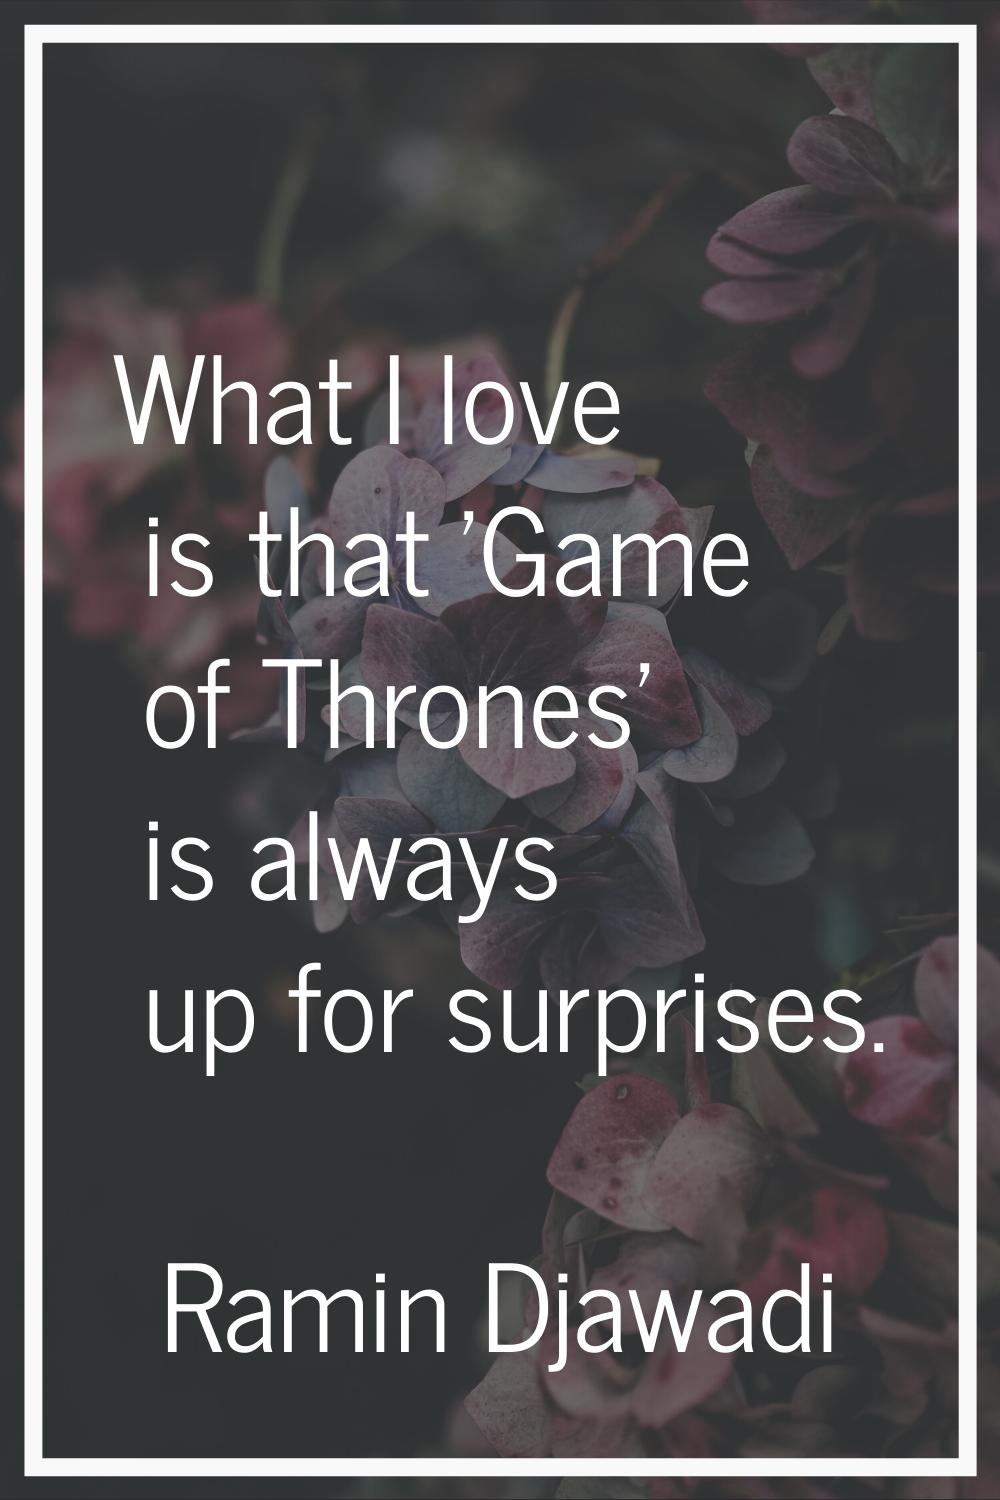 What I love is that 'Game of Thrones' is always up for surprises.